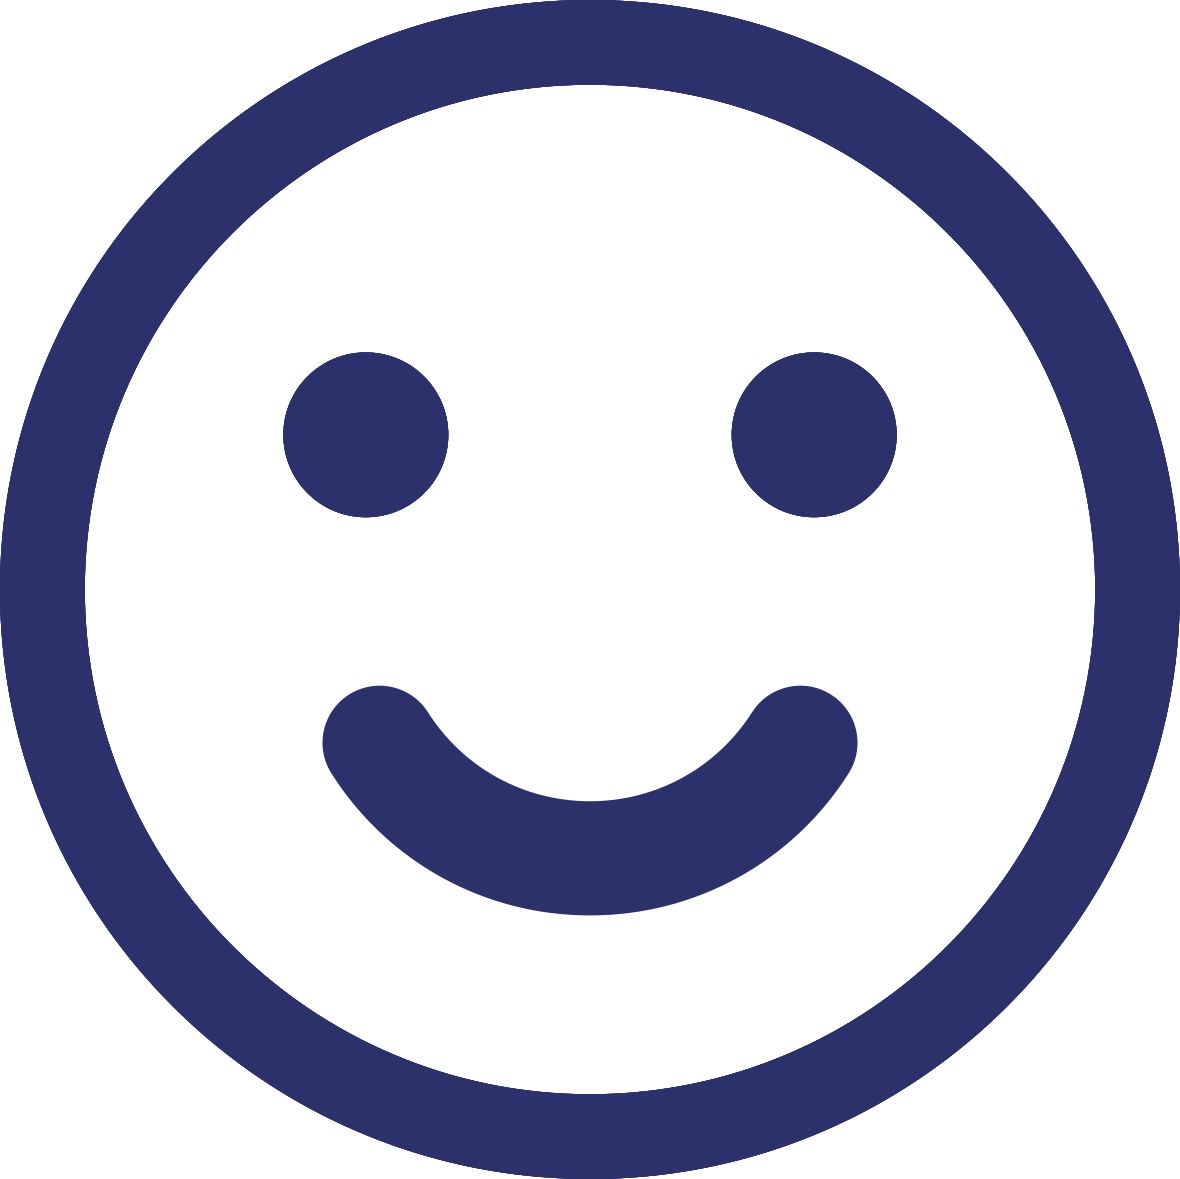 Smiley_Face_1.png